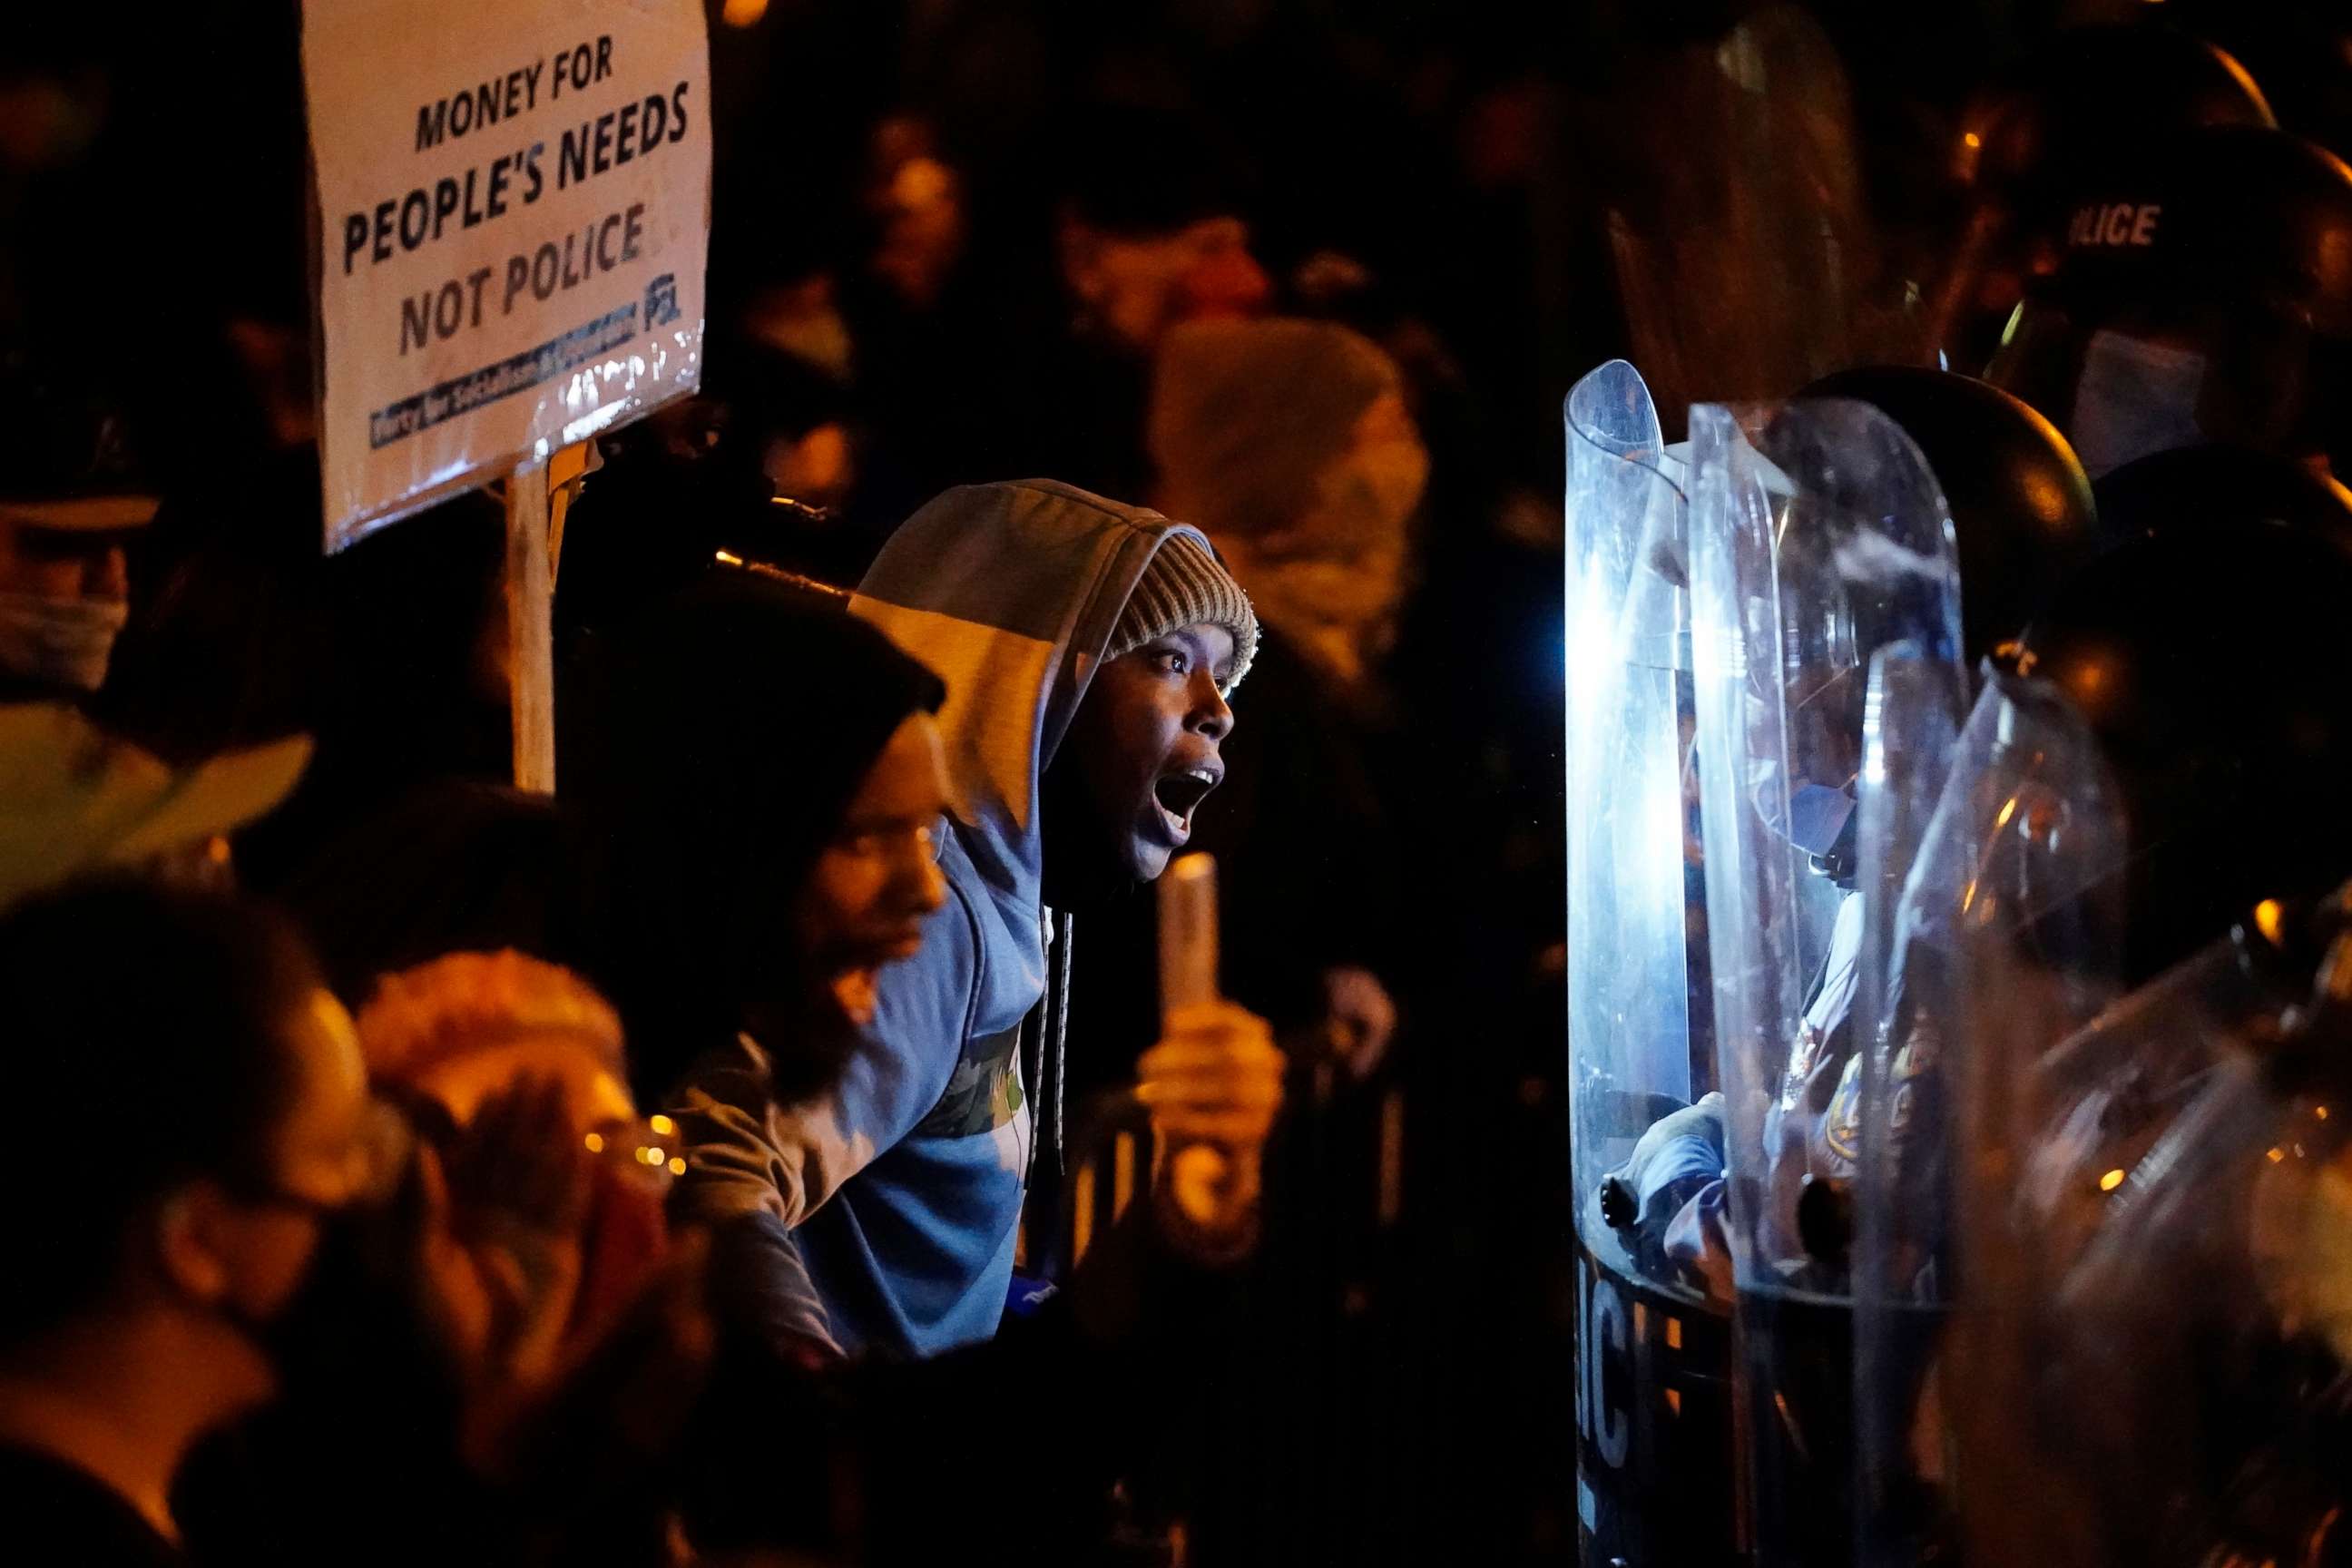 PHOTO: Protesters confront police during a march, Tuesday, Oct. 27, 2020, in Philadelphia. Hundreds of demonstrators marched in West Philadelphia over the death of Walter Wallace, a Black man who was killed by police in Philadelphia on Monday.